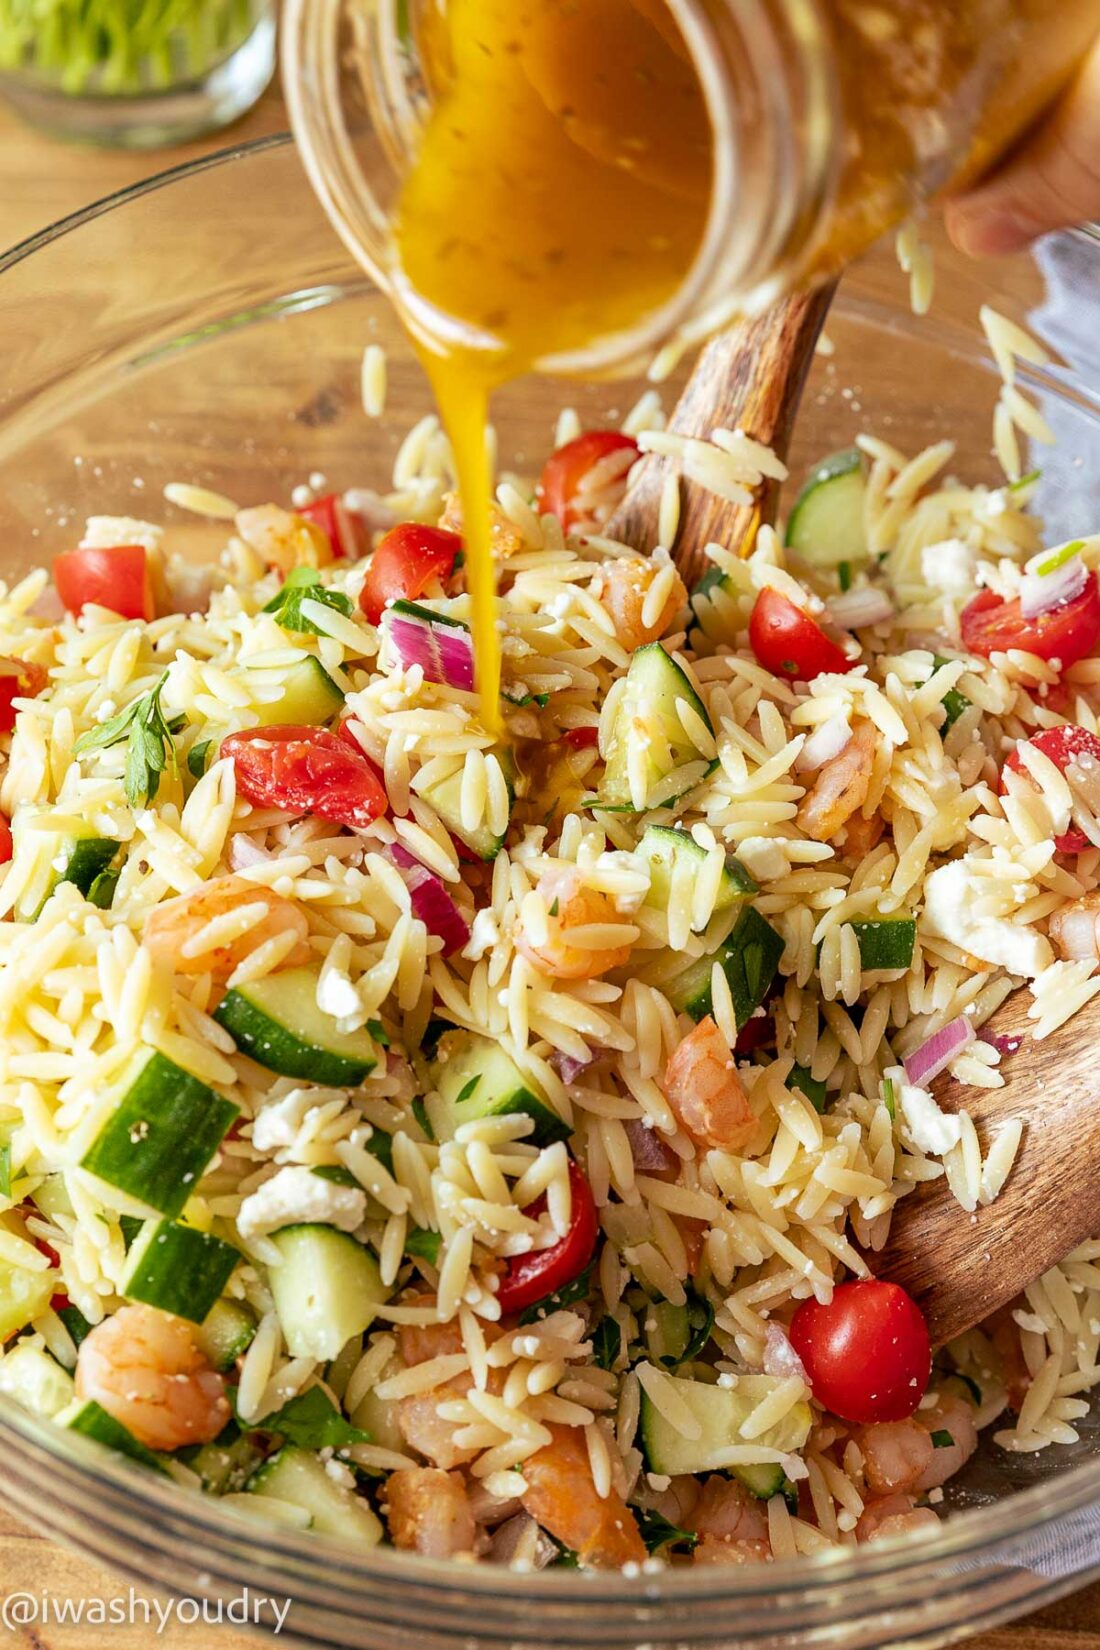 Pour the dressing over the shrimp orzo pasta salad. 